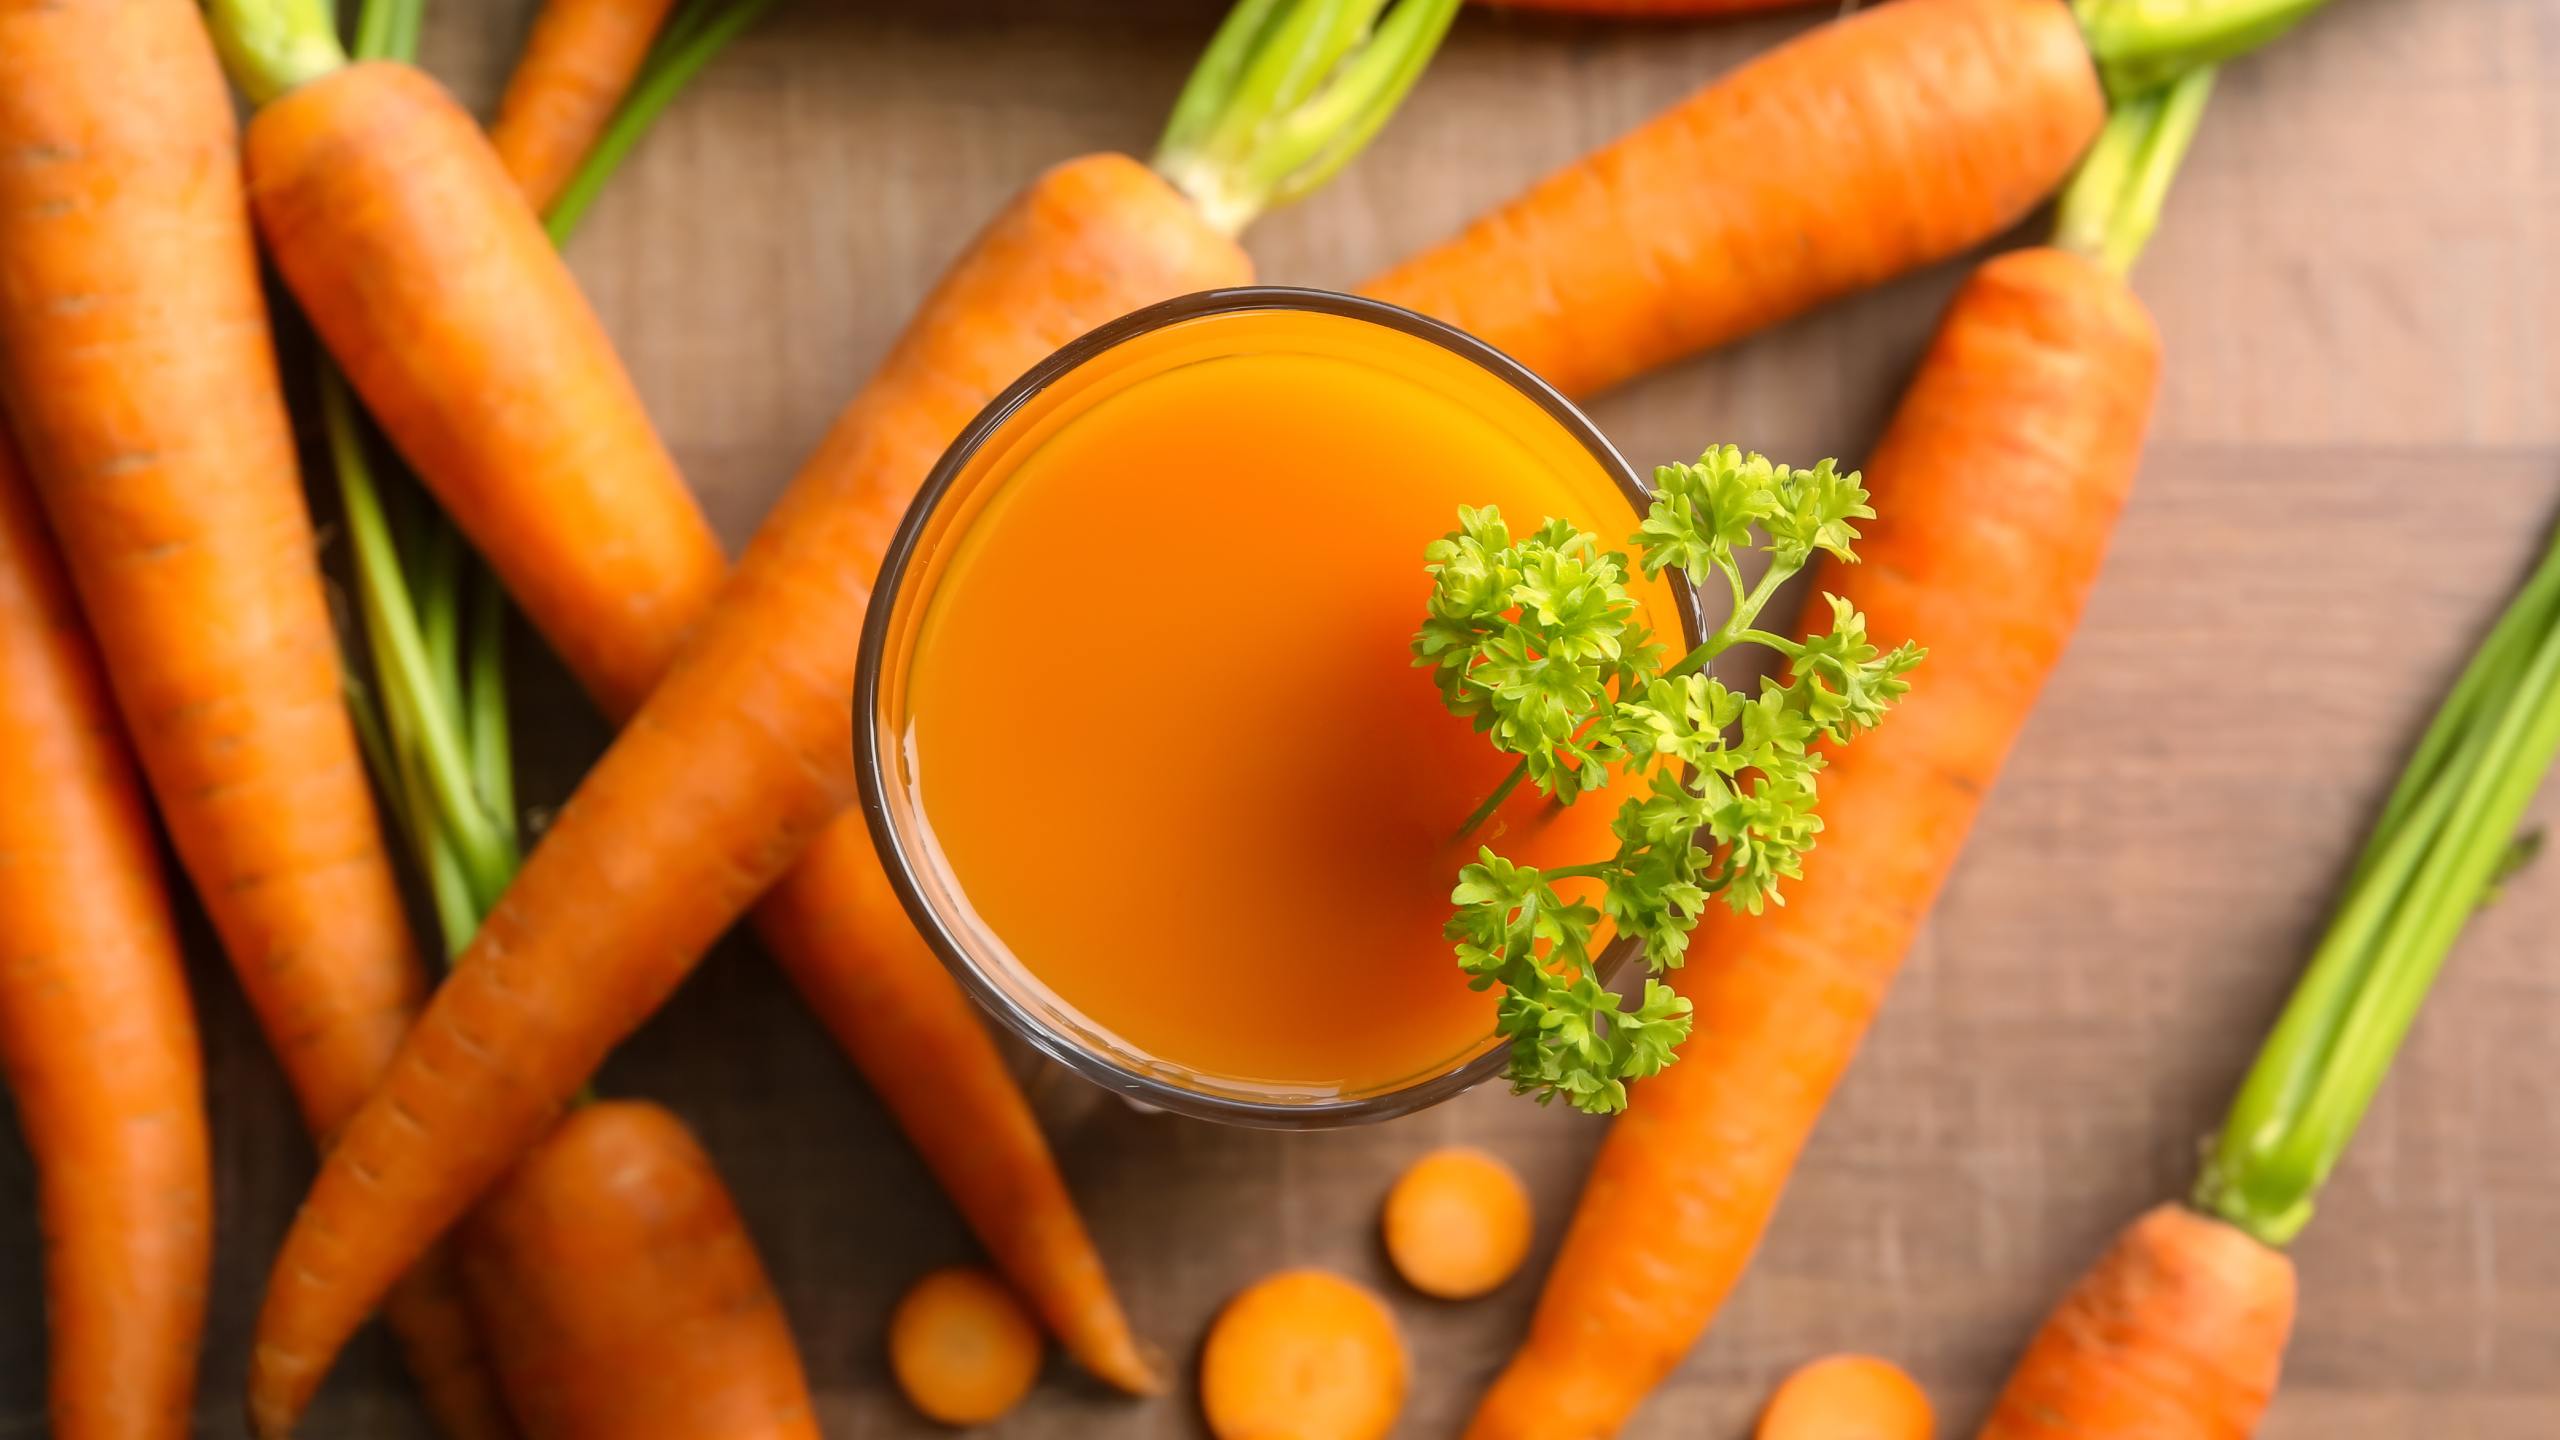 Glass of carrot juice, decorated with a branch, and several carrots scattered in a table.